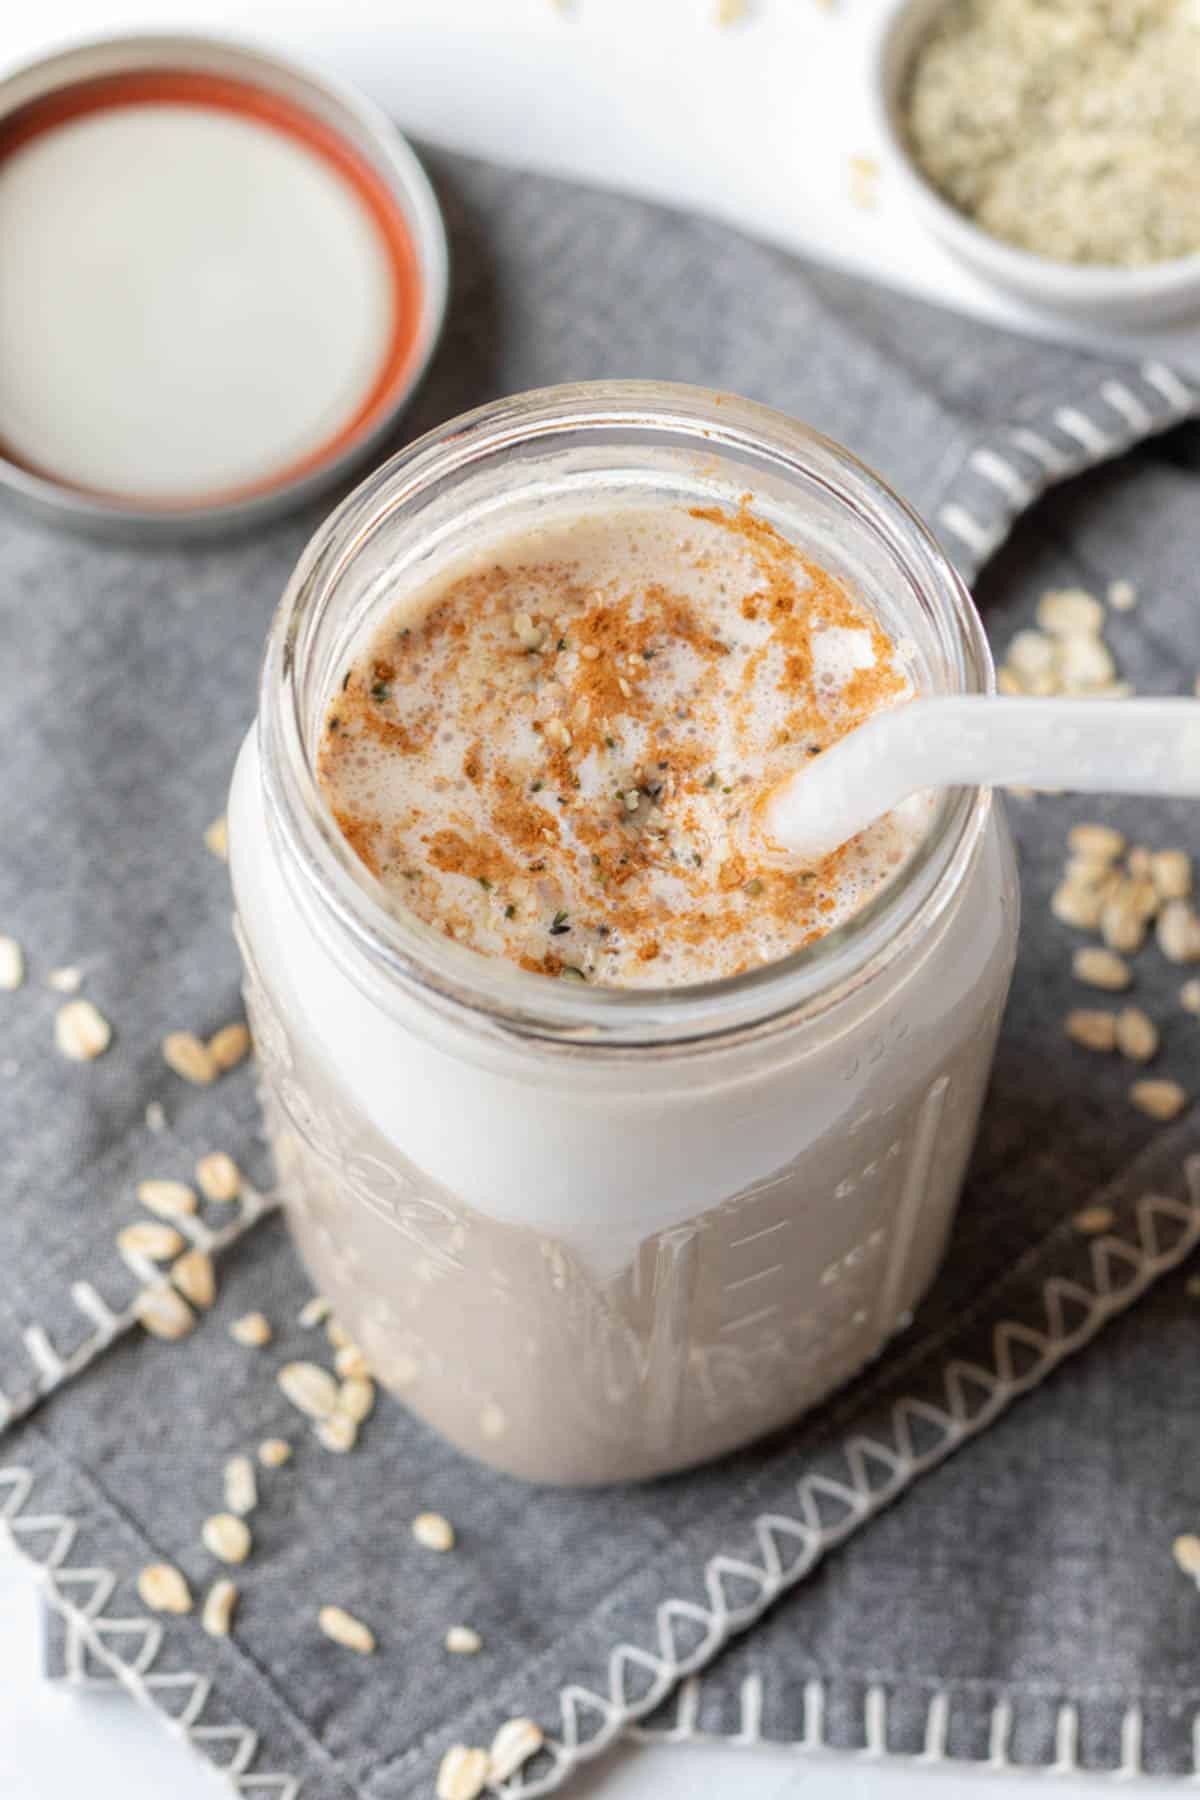 Creamy oat drink topped with cinnamon in a large glass Ball jar with a glass straw.